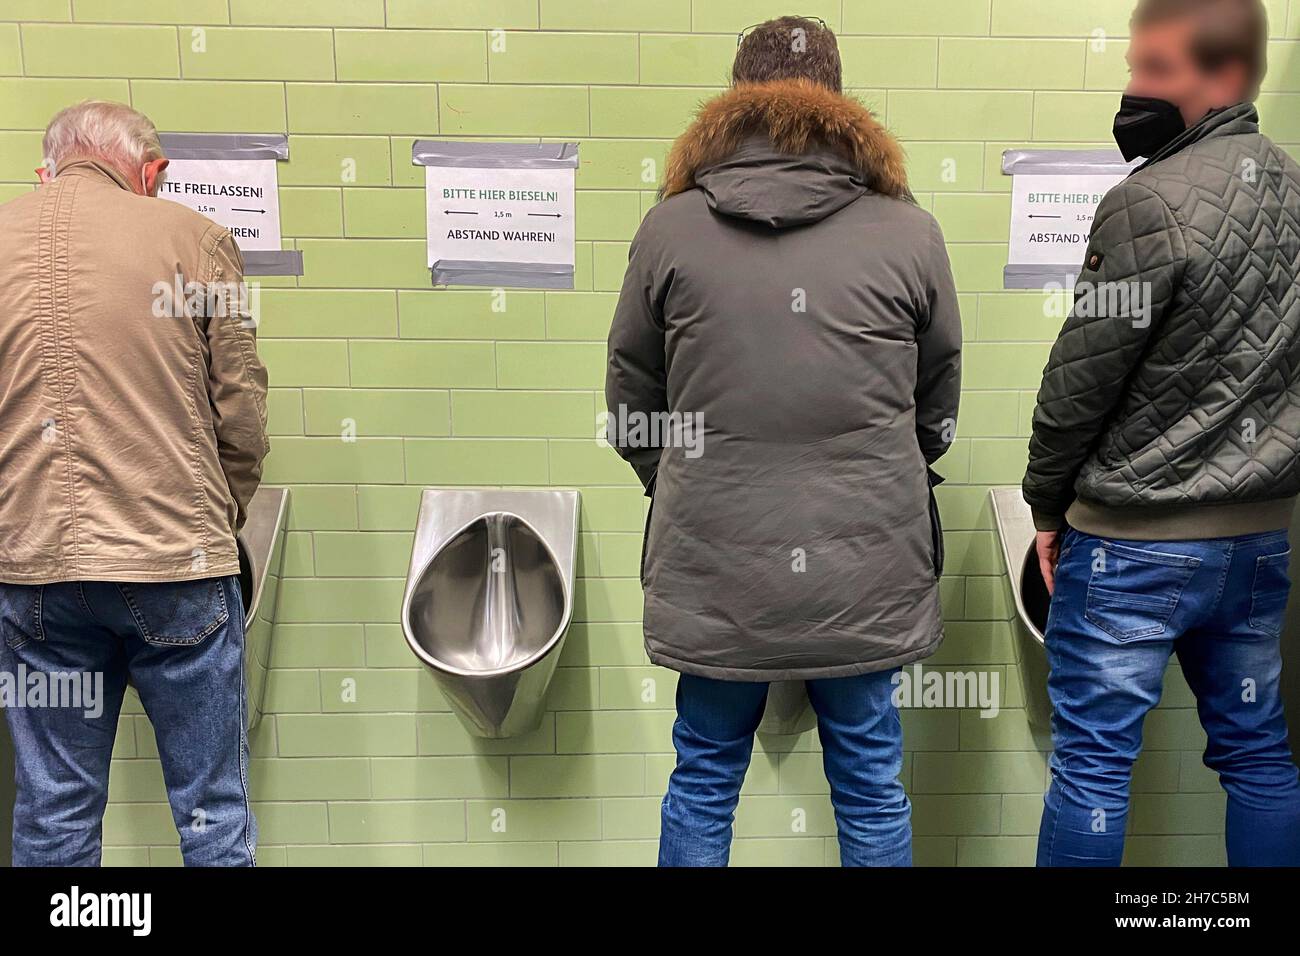 Munich, Deutschland. 22nd Nov, 2021. Topic picture Corona hygiene measures-distance in the men's room-breaking the corona rule. Every second urinal, urinal, urinal, toilet is blocked and out of order in order to comply with the distance rule, which one of the three men does not follow. Credit: dpa/Alamy Live News Stock Photo